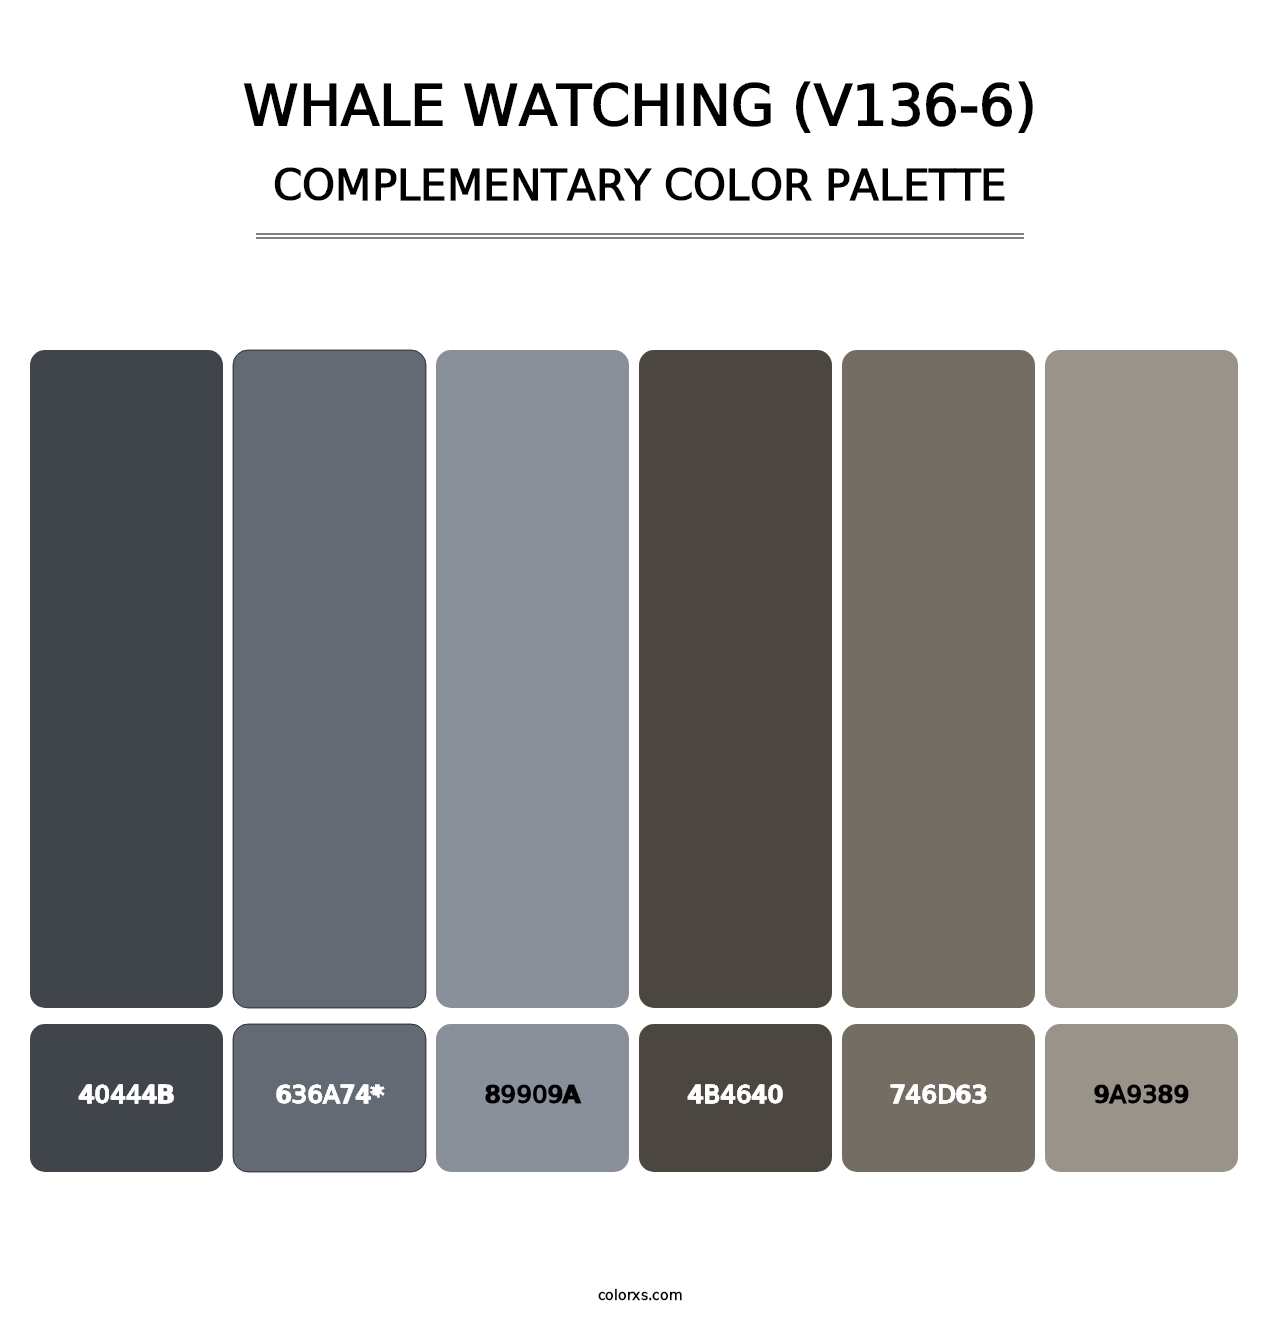 Whale Watching (V136-6) - Complementary Color Palette